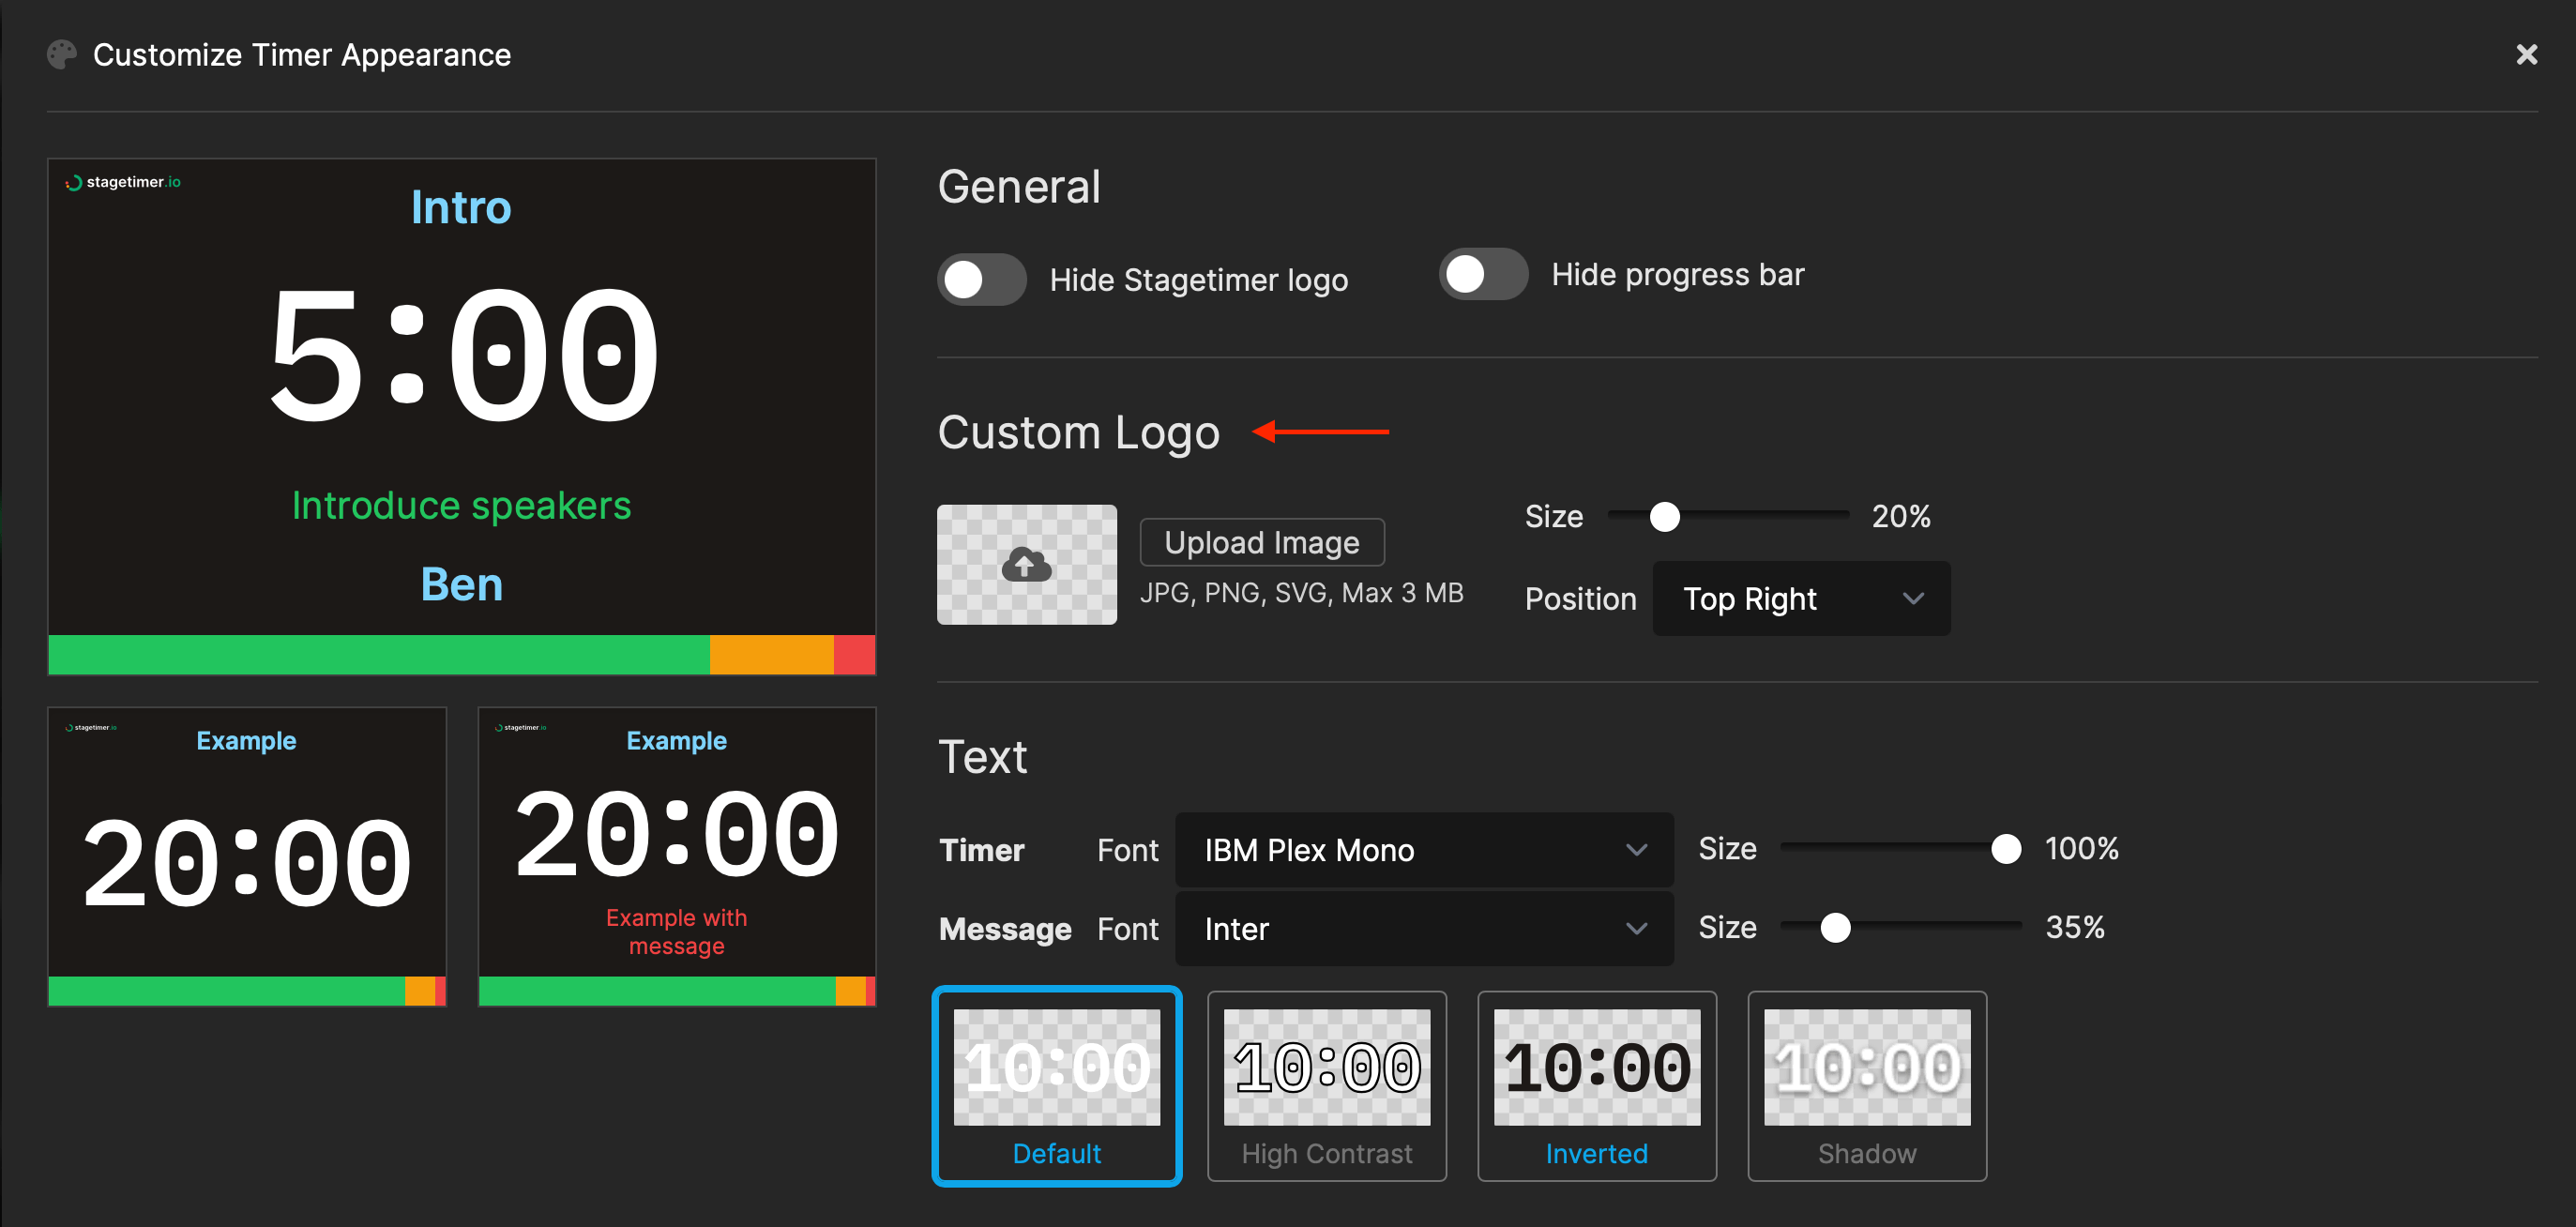 The customize timer appearance popup allows you to custom the logo on the timer viewer